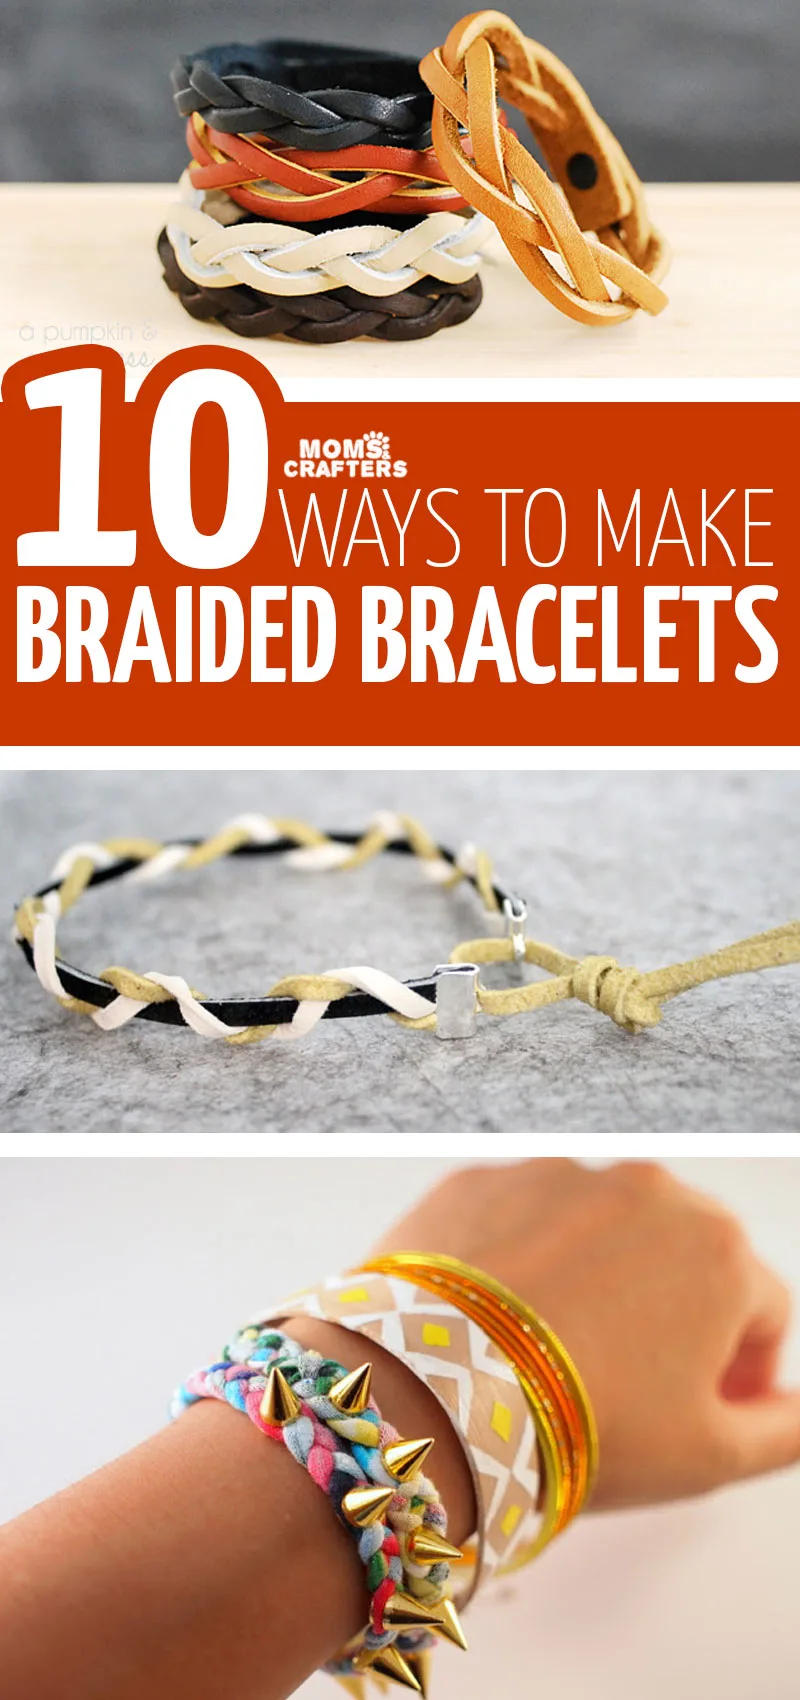 10 braid bracelet DIY ideas for you to try today! These are great beginner jewelry making crafts for teens and tween boys and girls.